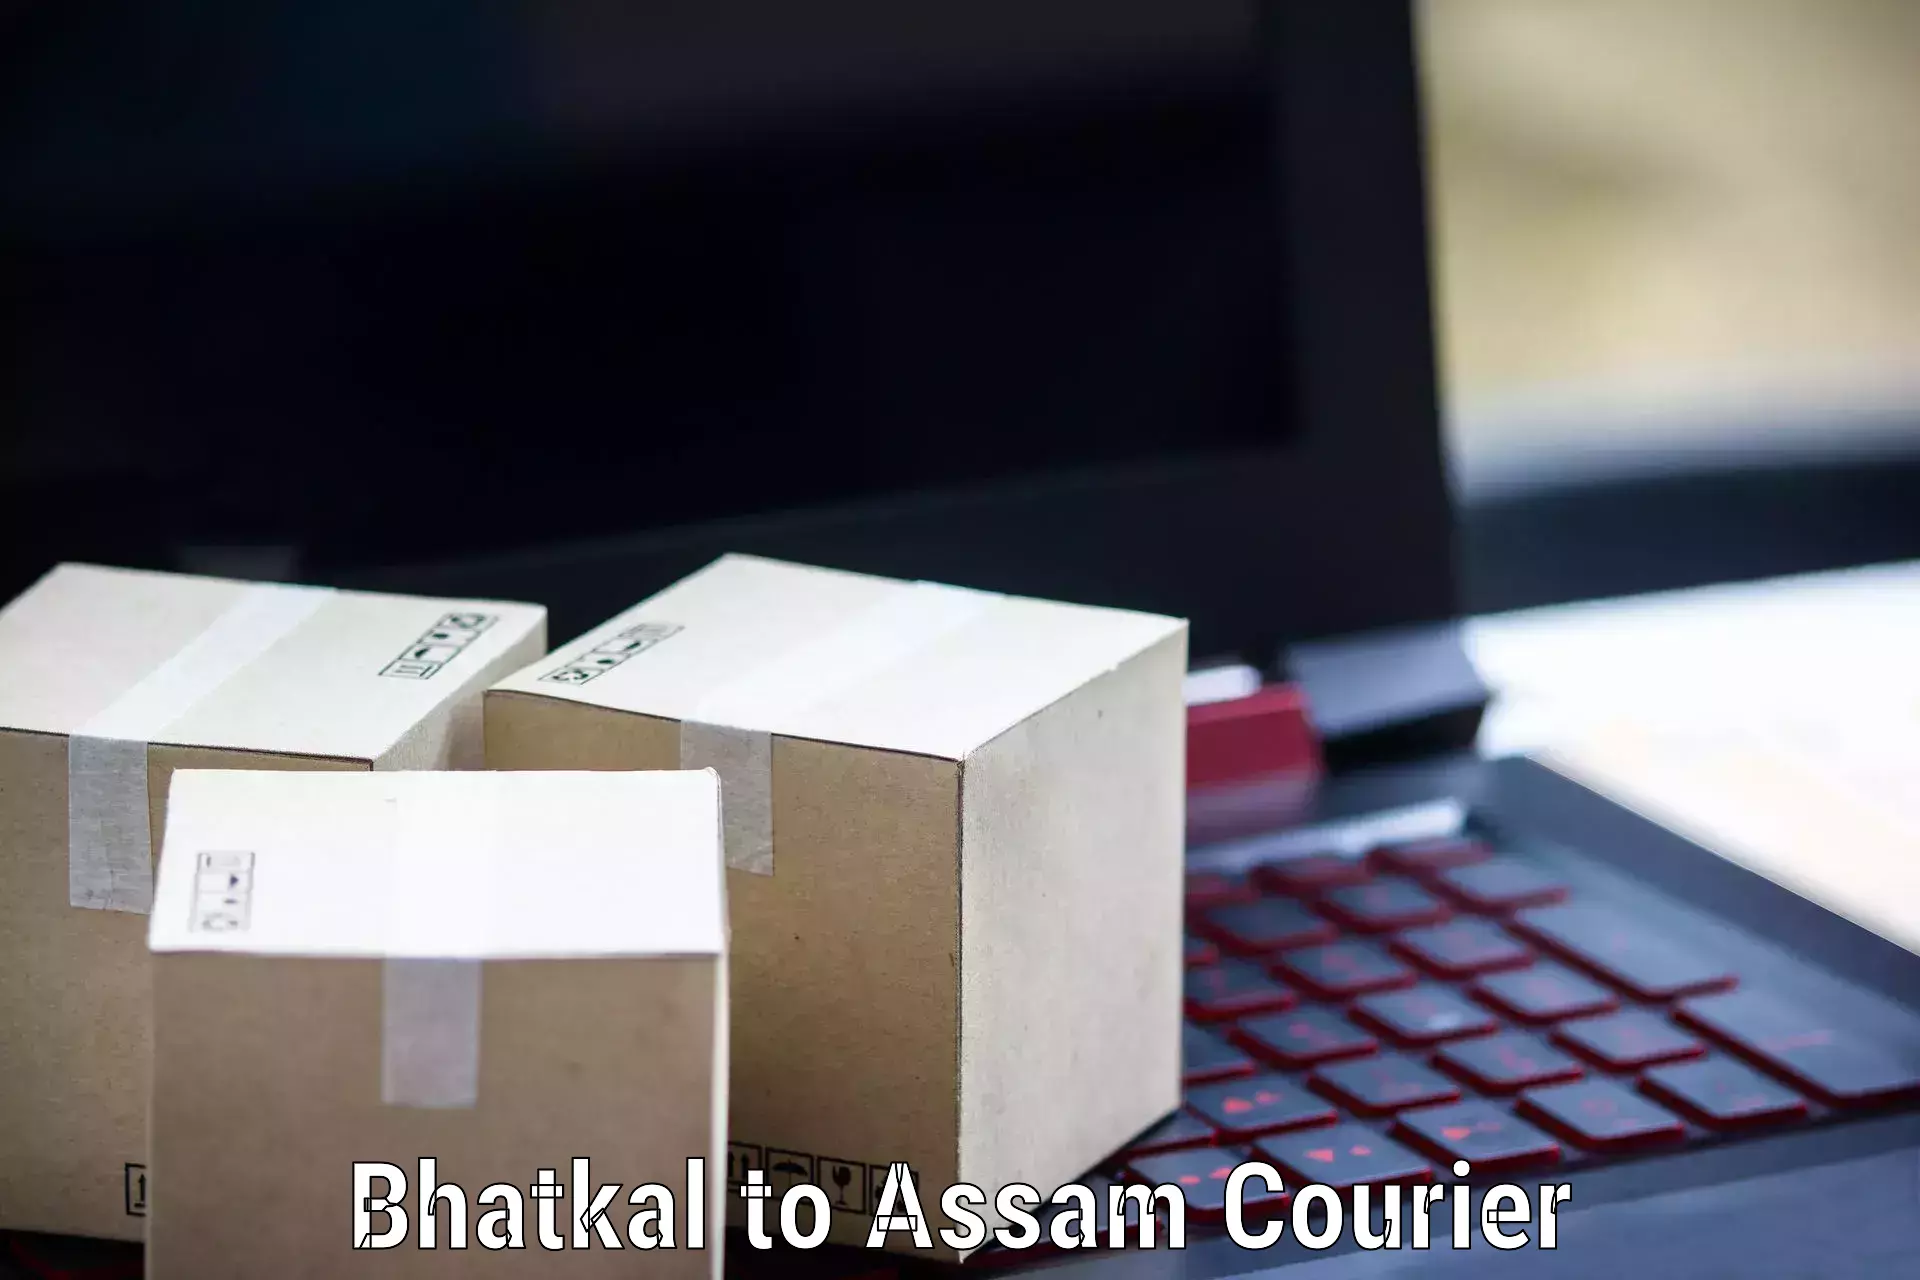 Doorstep delivery service Bhatkal to Dhupdhara